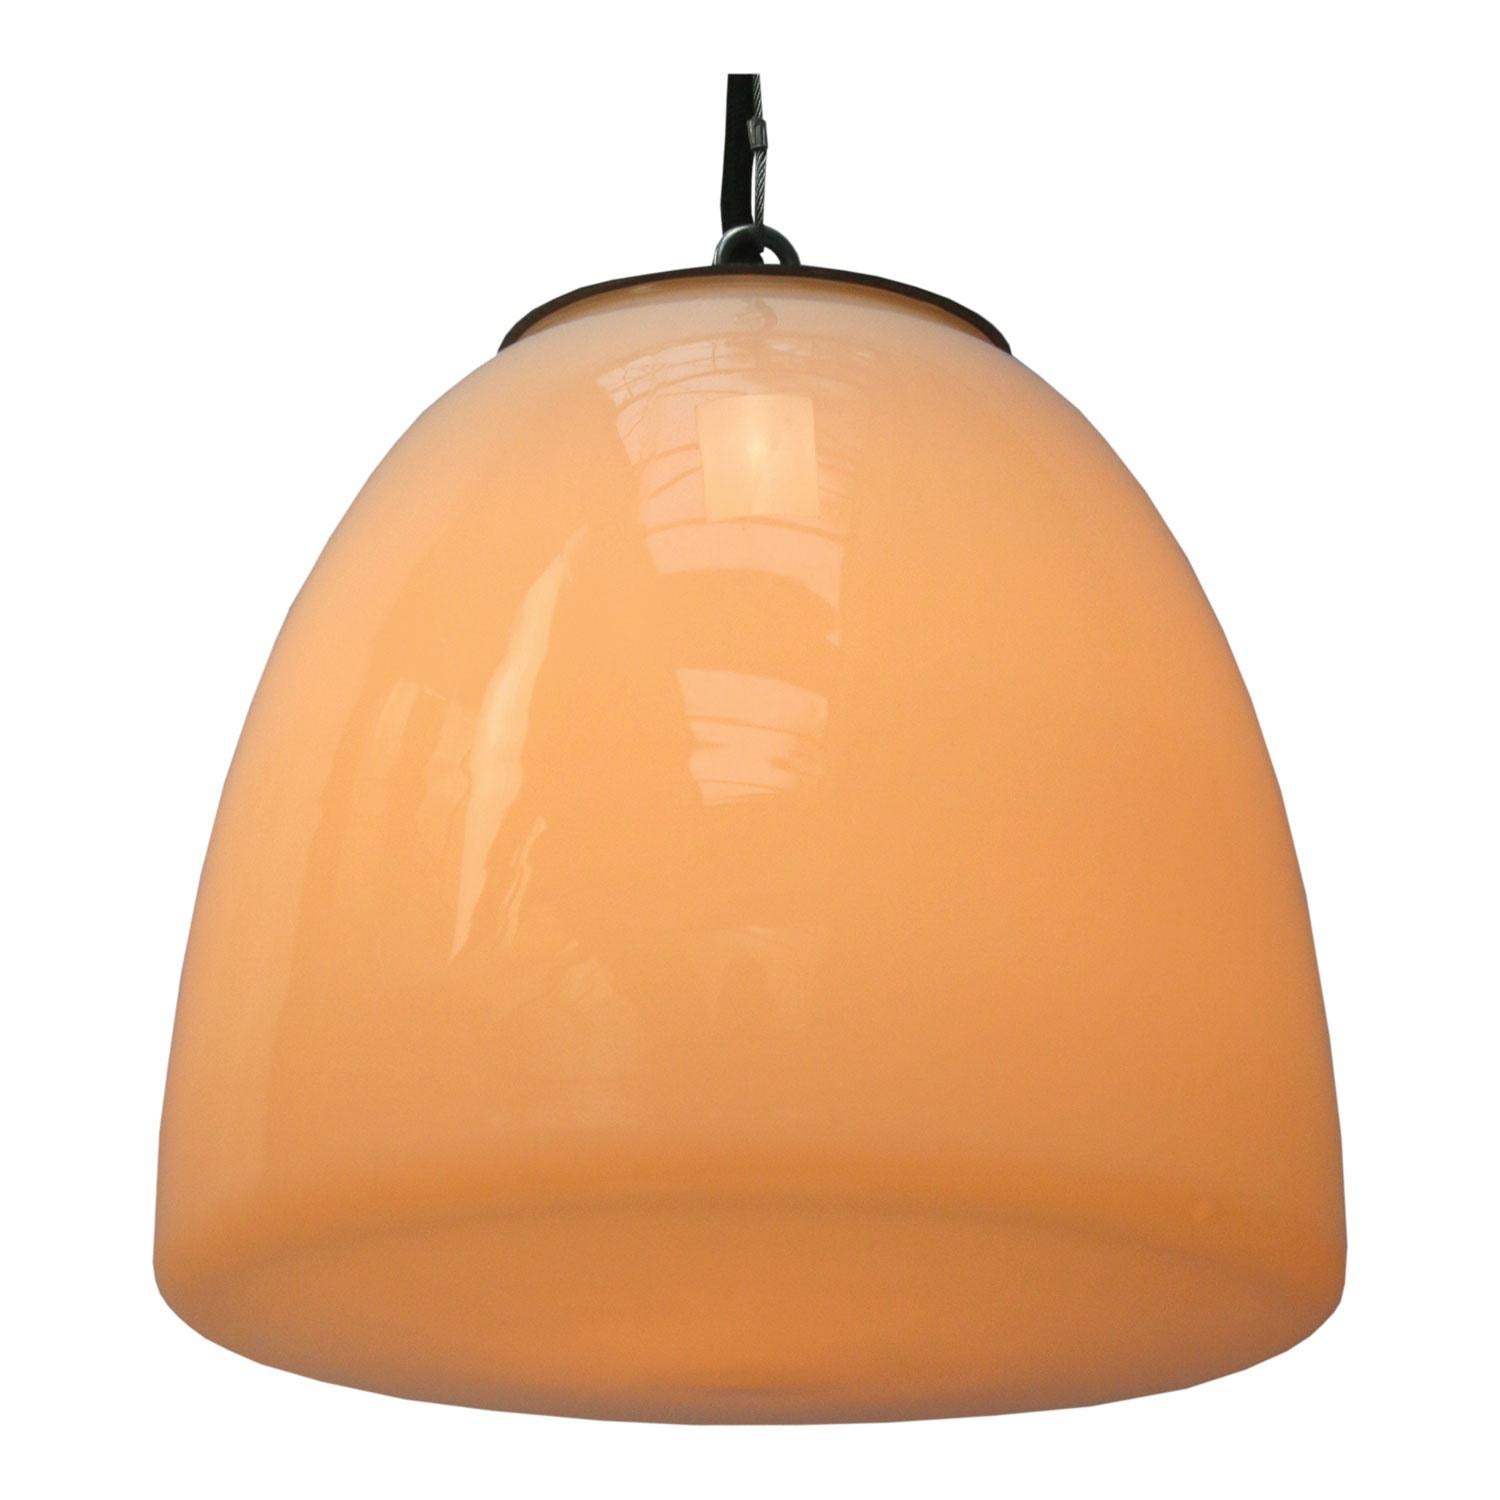 Opaline glass pendant.
2 meter black wire

Weight: 1.70 kg / 3.7 lb

Priced per individual item. All lamps have been made suitable by international standards for incandescent light bulbs, energy-efficient and LED bulbs. E26/E27 bulb holders and